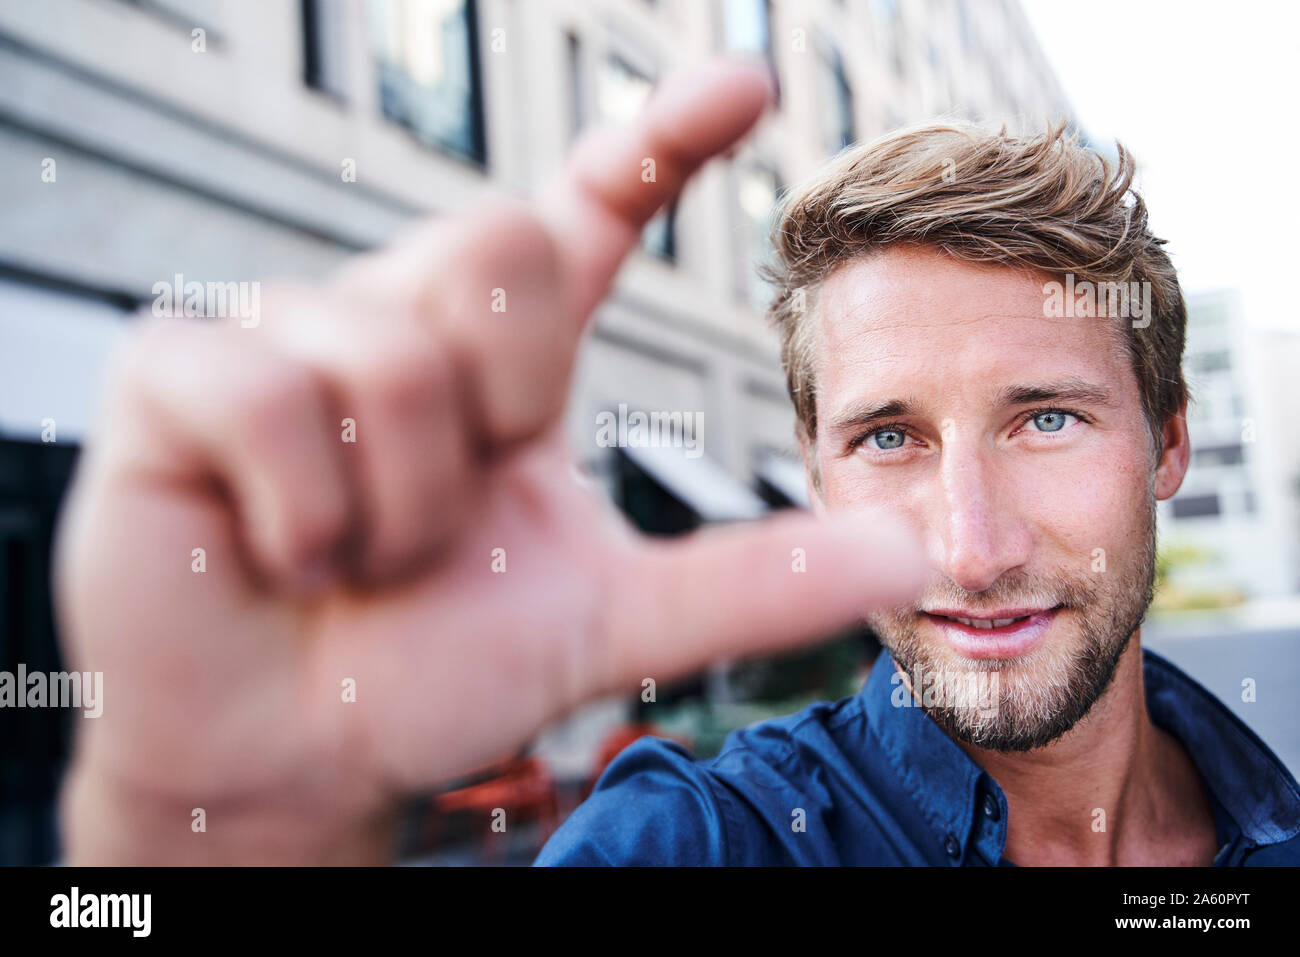 Portrait of young man gesticulating Stock Photo